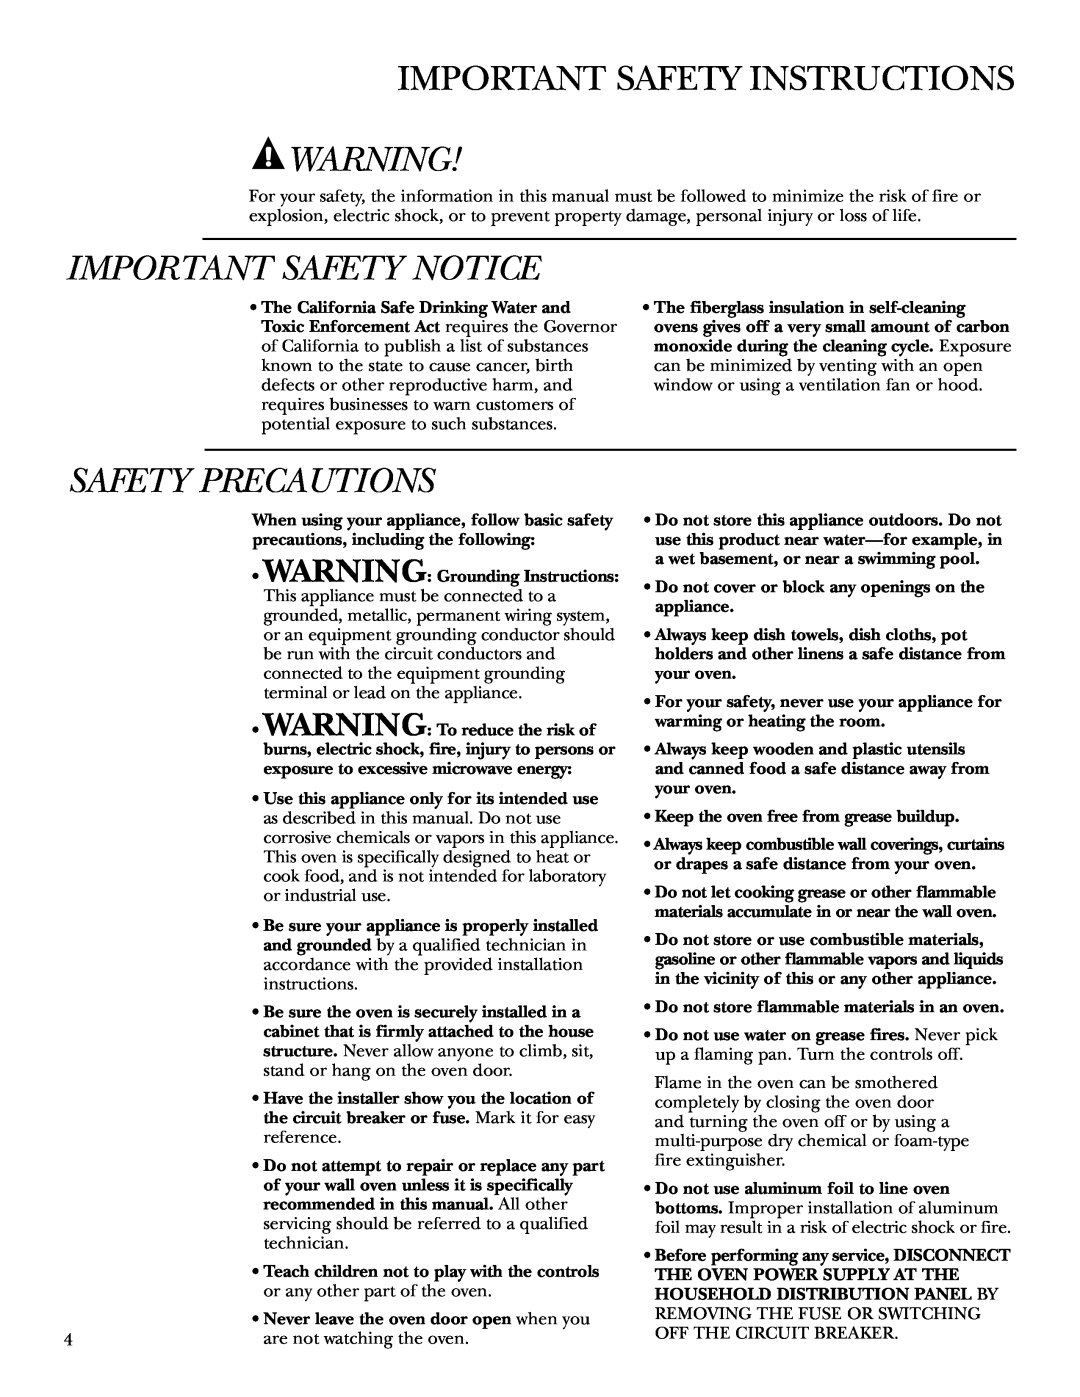 GE ZET3038 Important Safety Instructions, Important Safety Notice, Safety Precautions, WARNING Grounding Instructions 